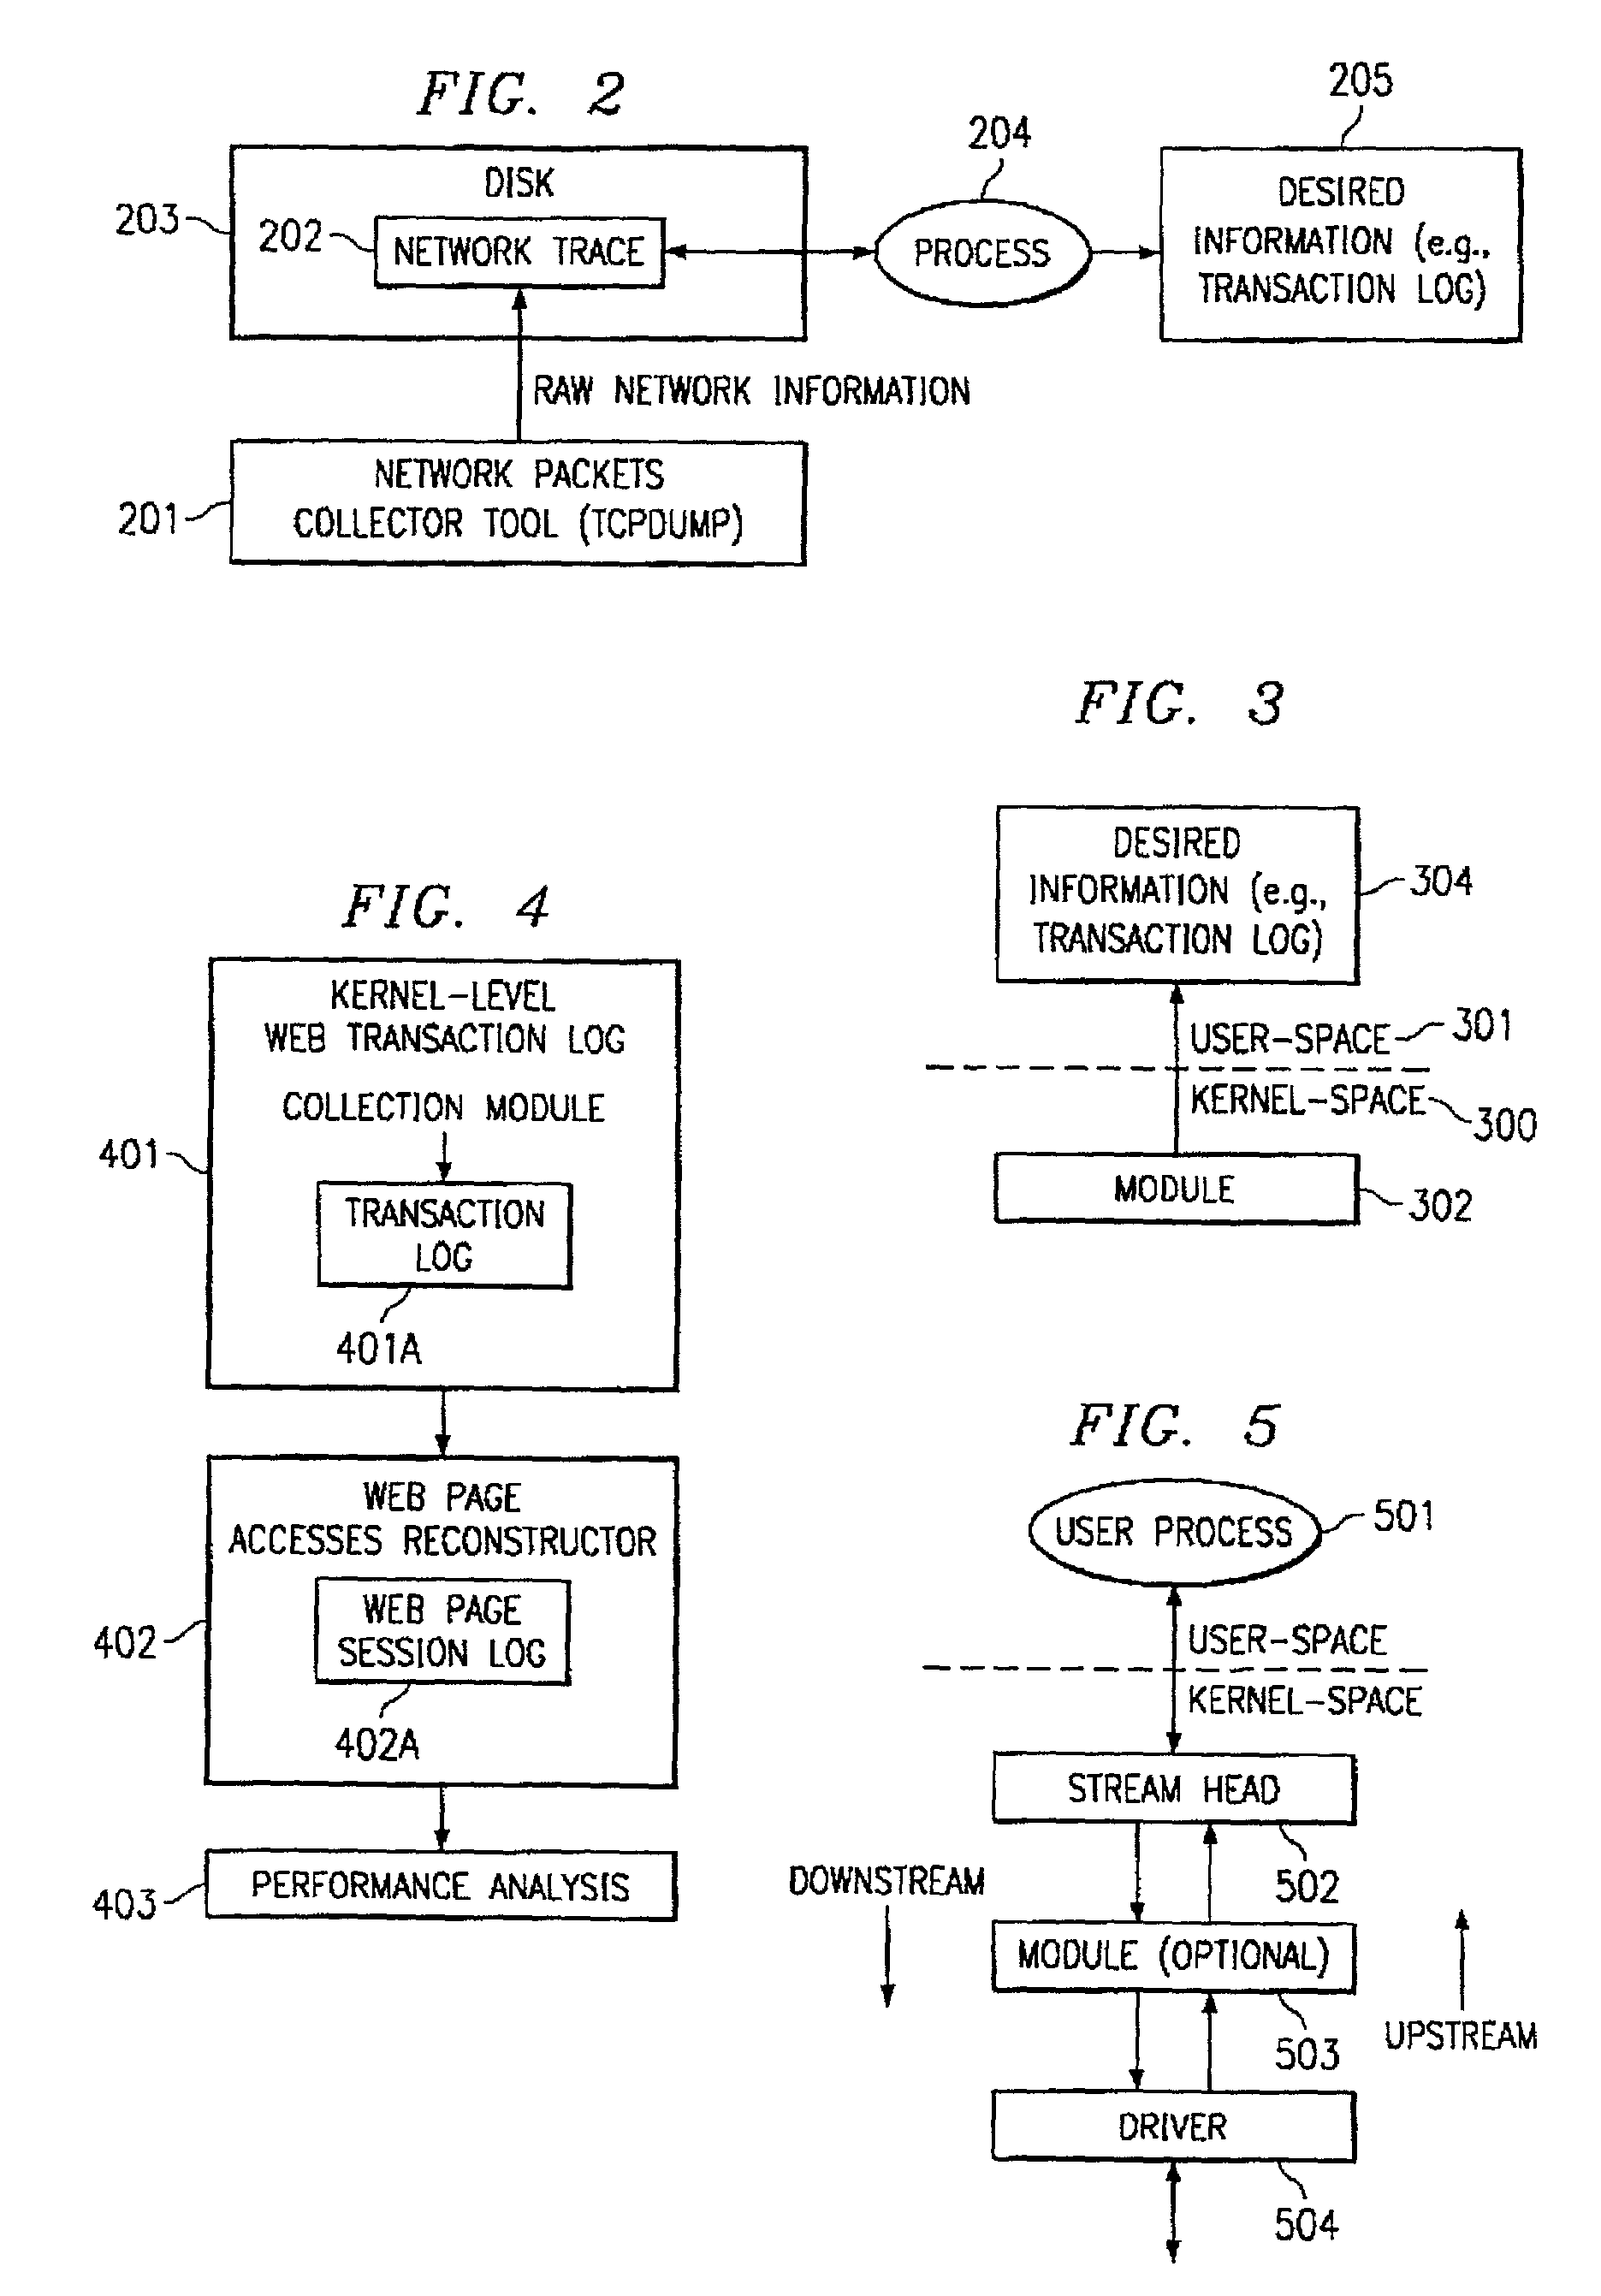 System and method for collecting desired information for network transactions at the kernel level